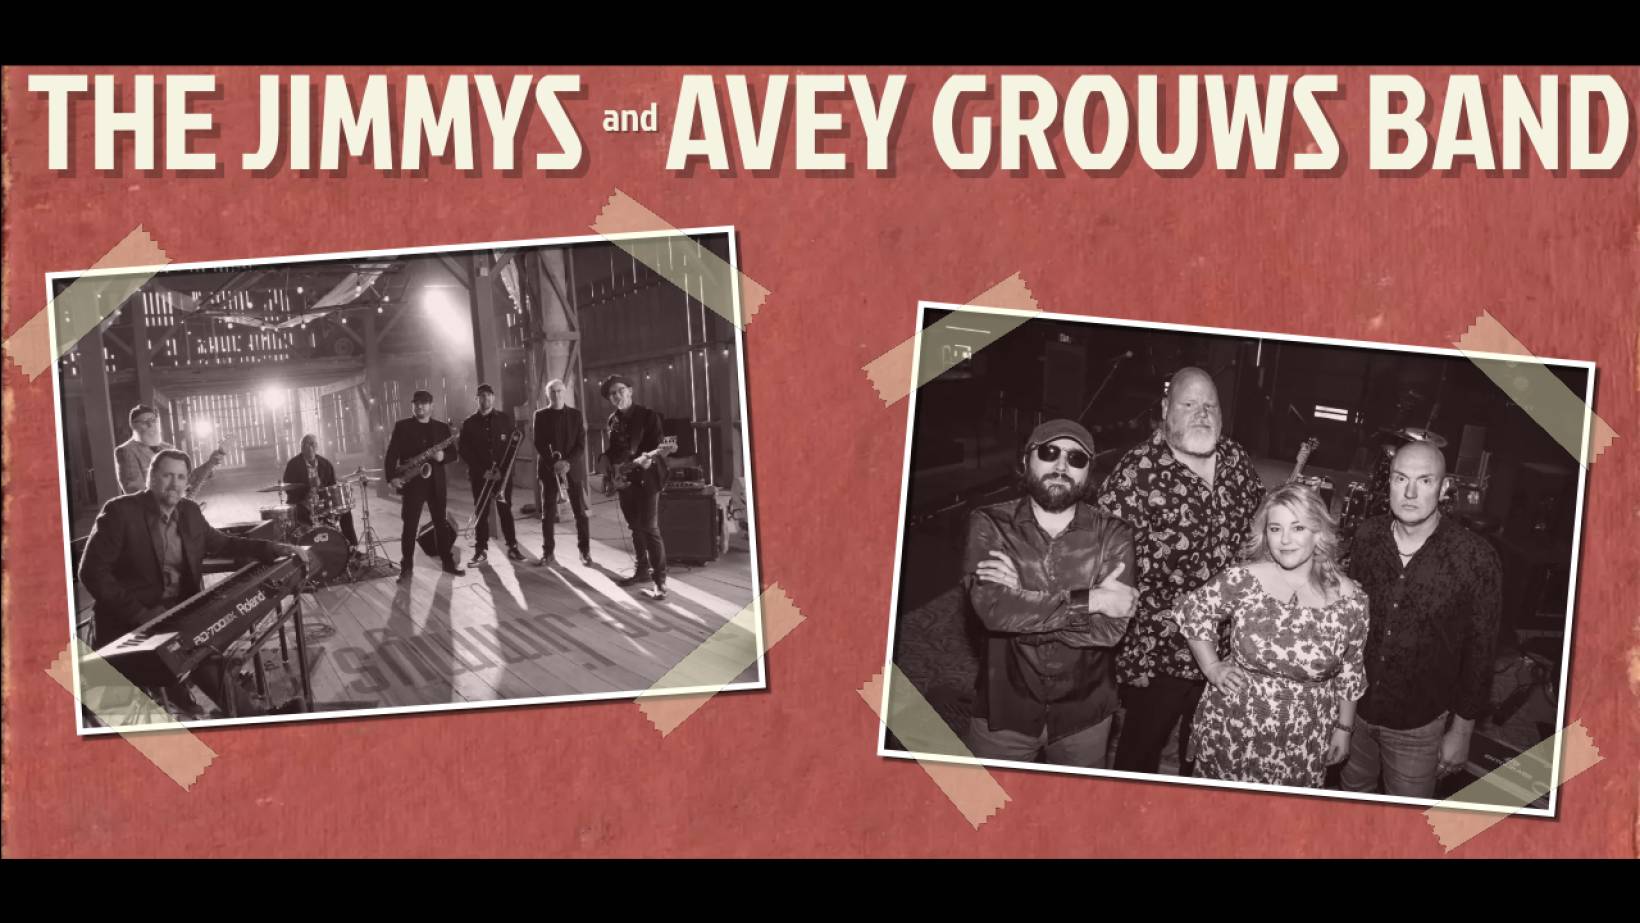 The Jimmys and Avey Grouws Band